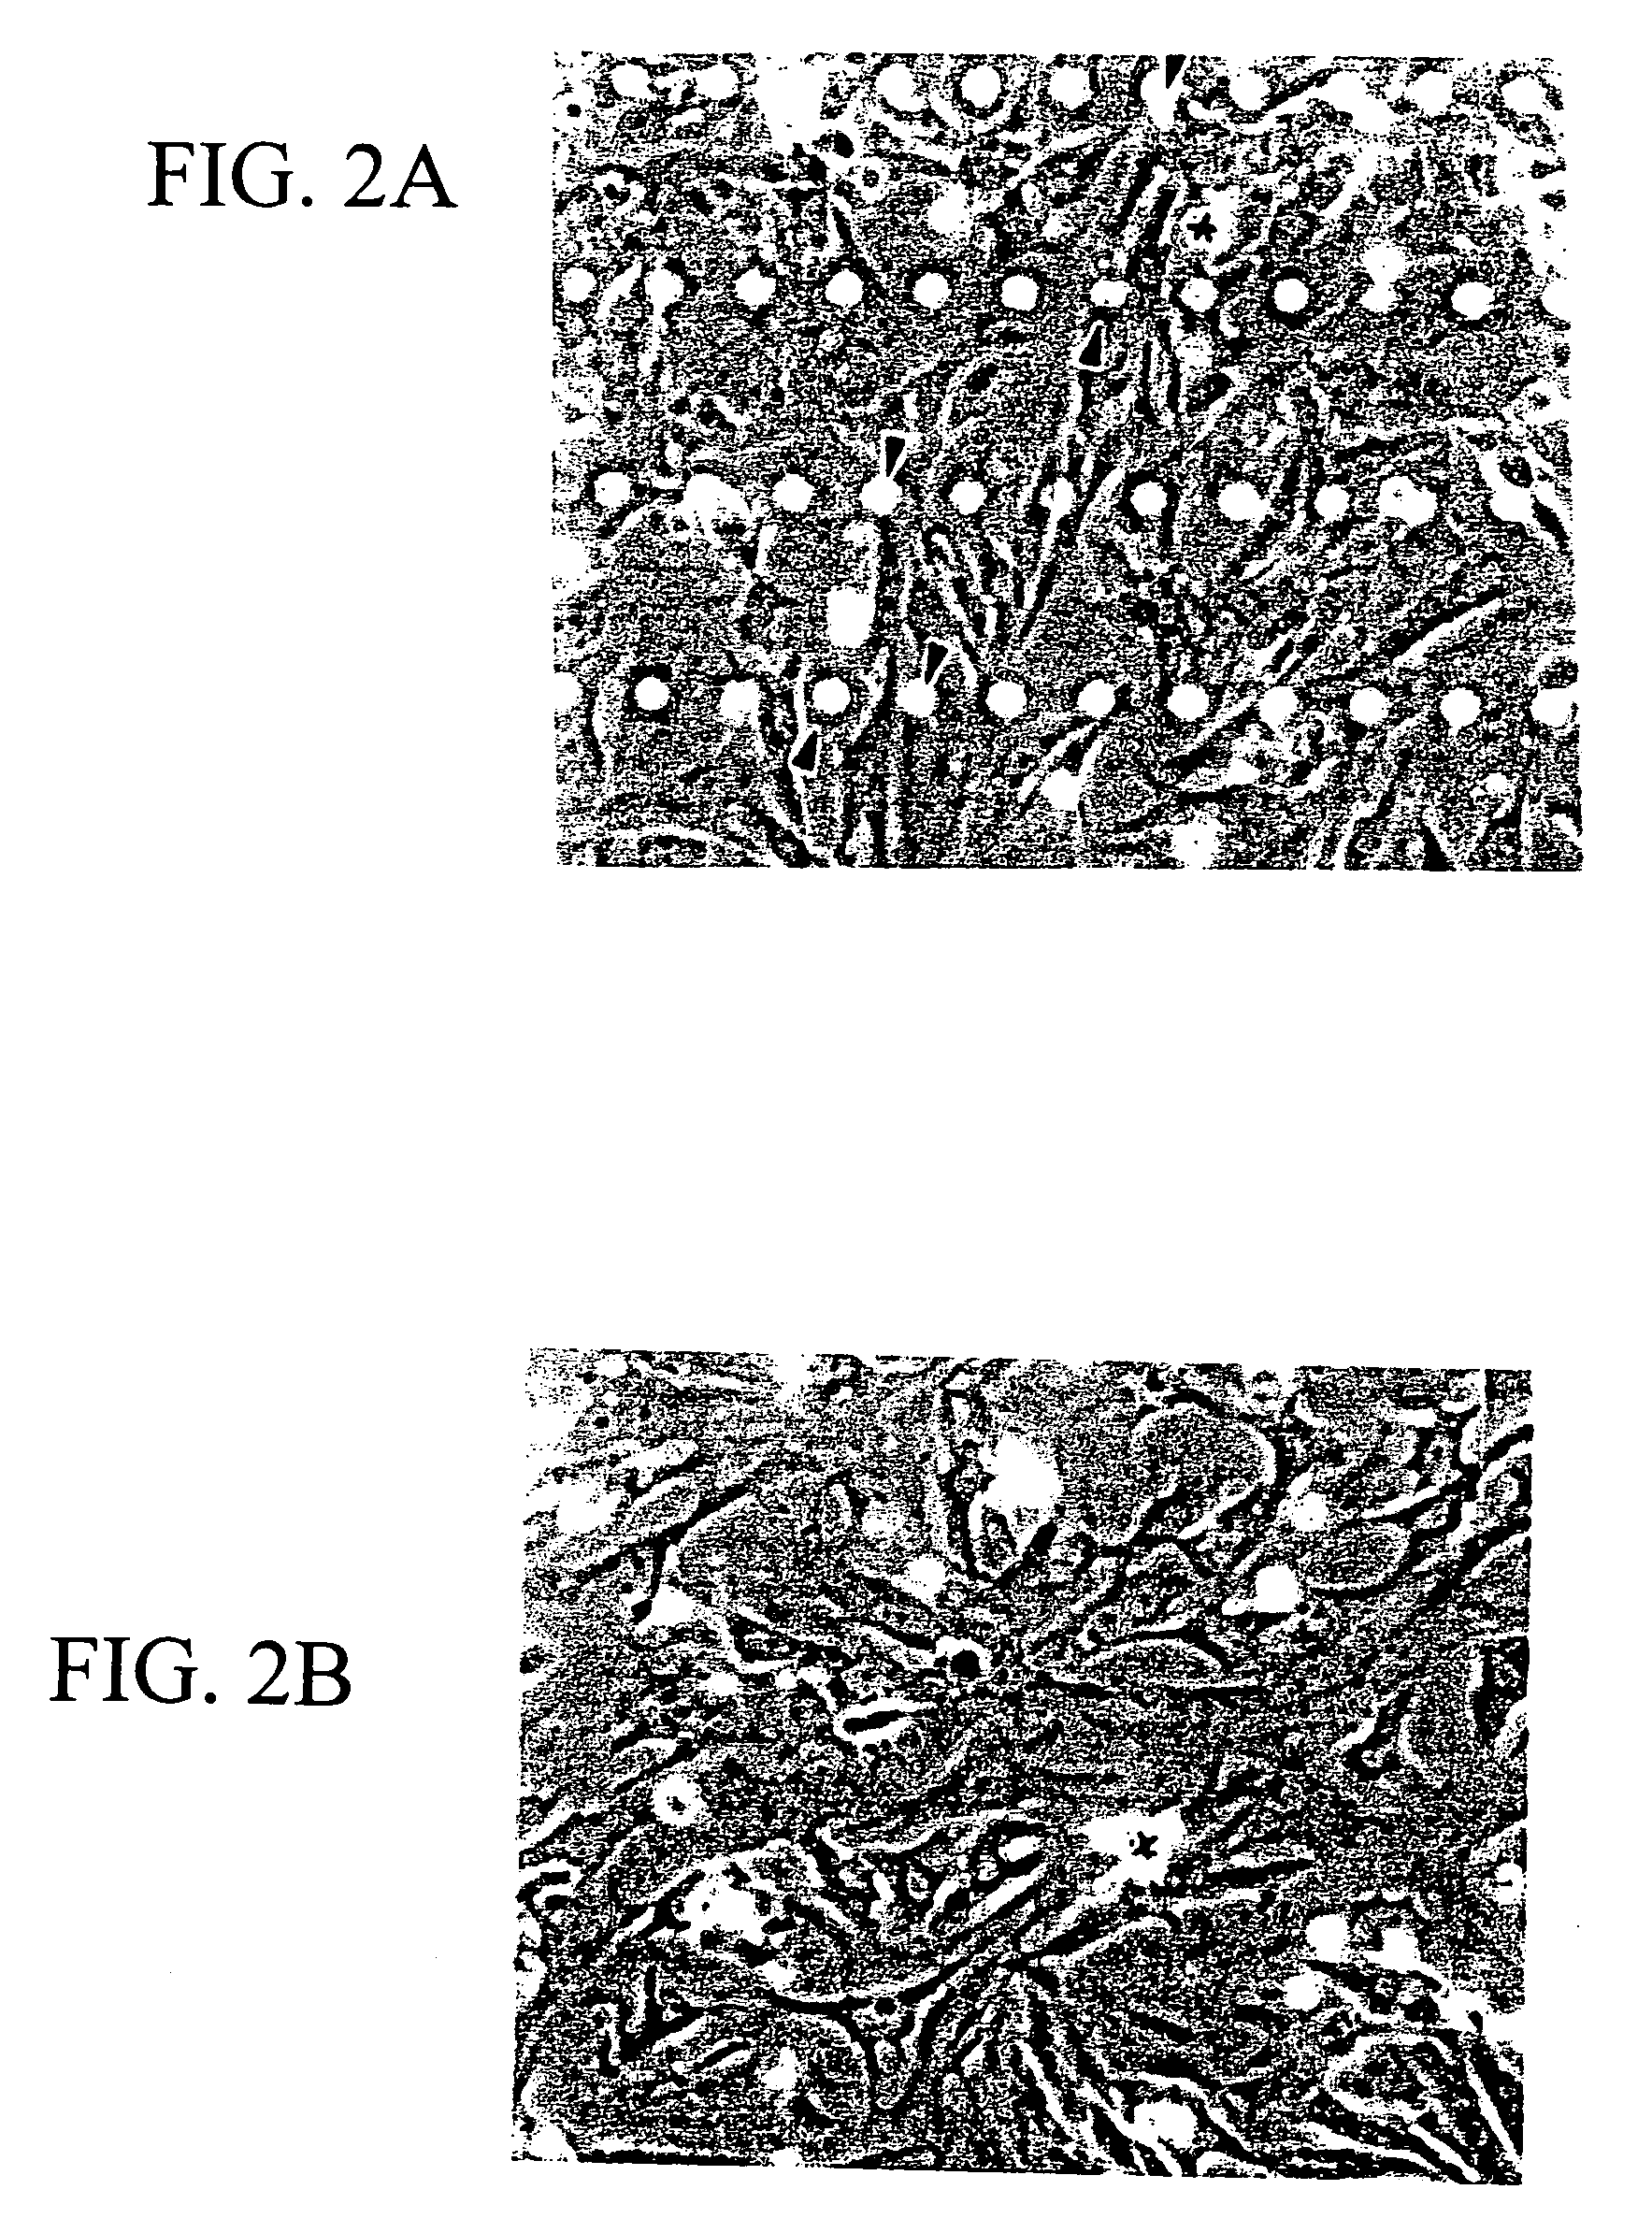 Method of growing stem cells on a membrane containing projections and grooves